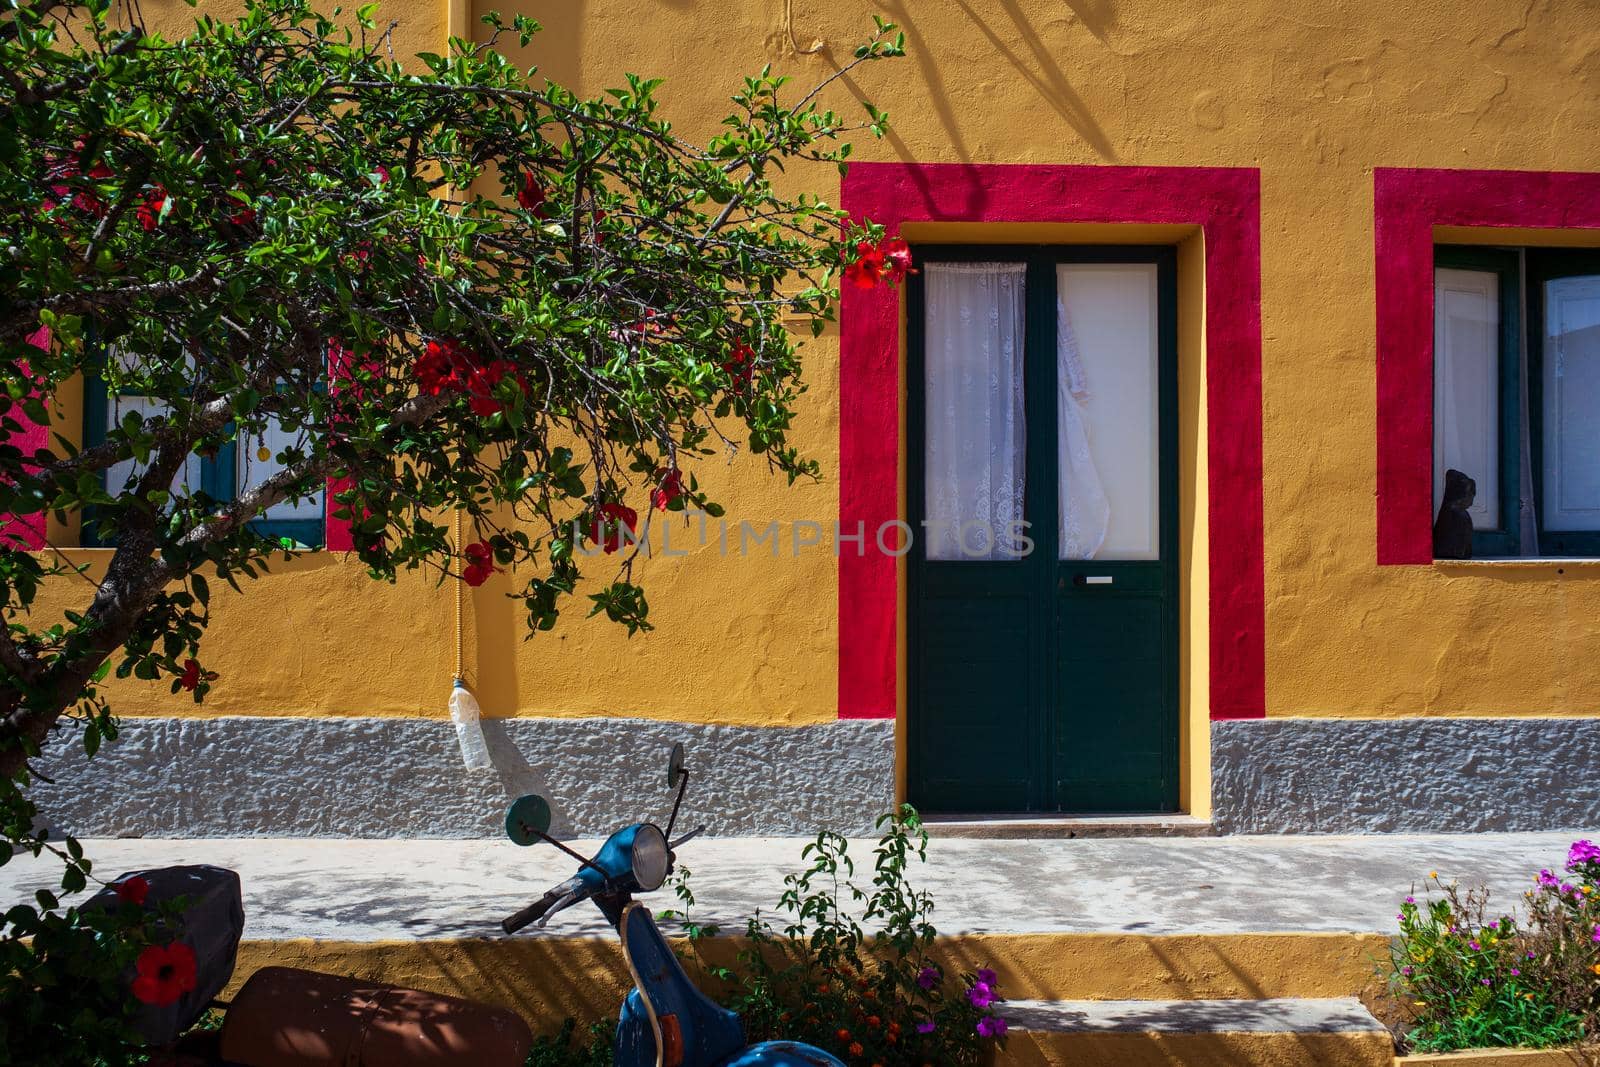 View of a typical colorful house of Linosa, colored red and orange with green door